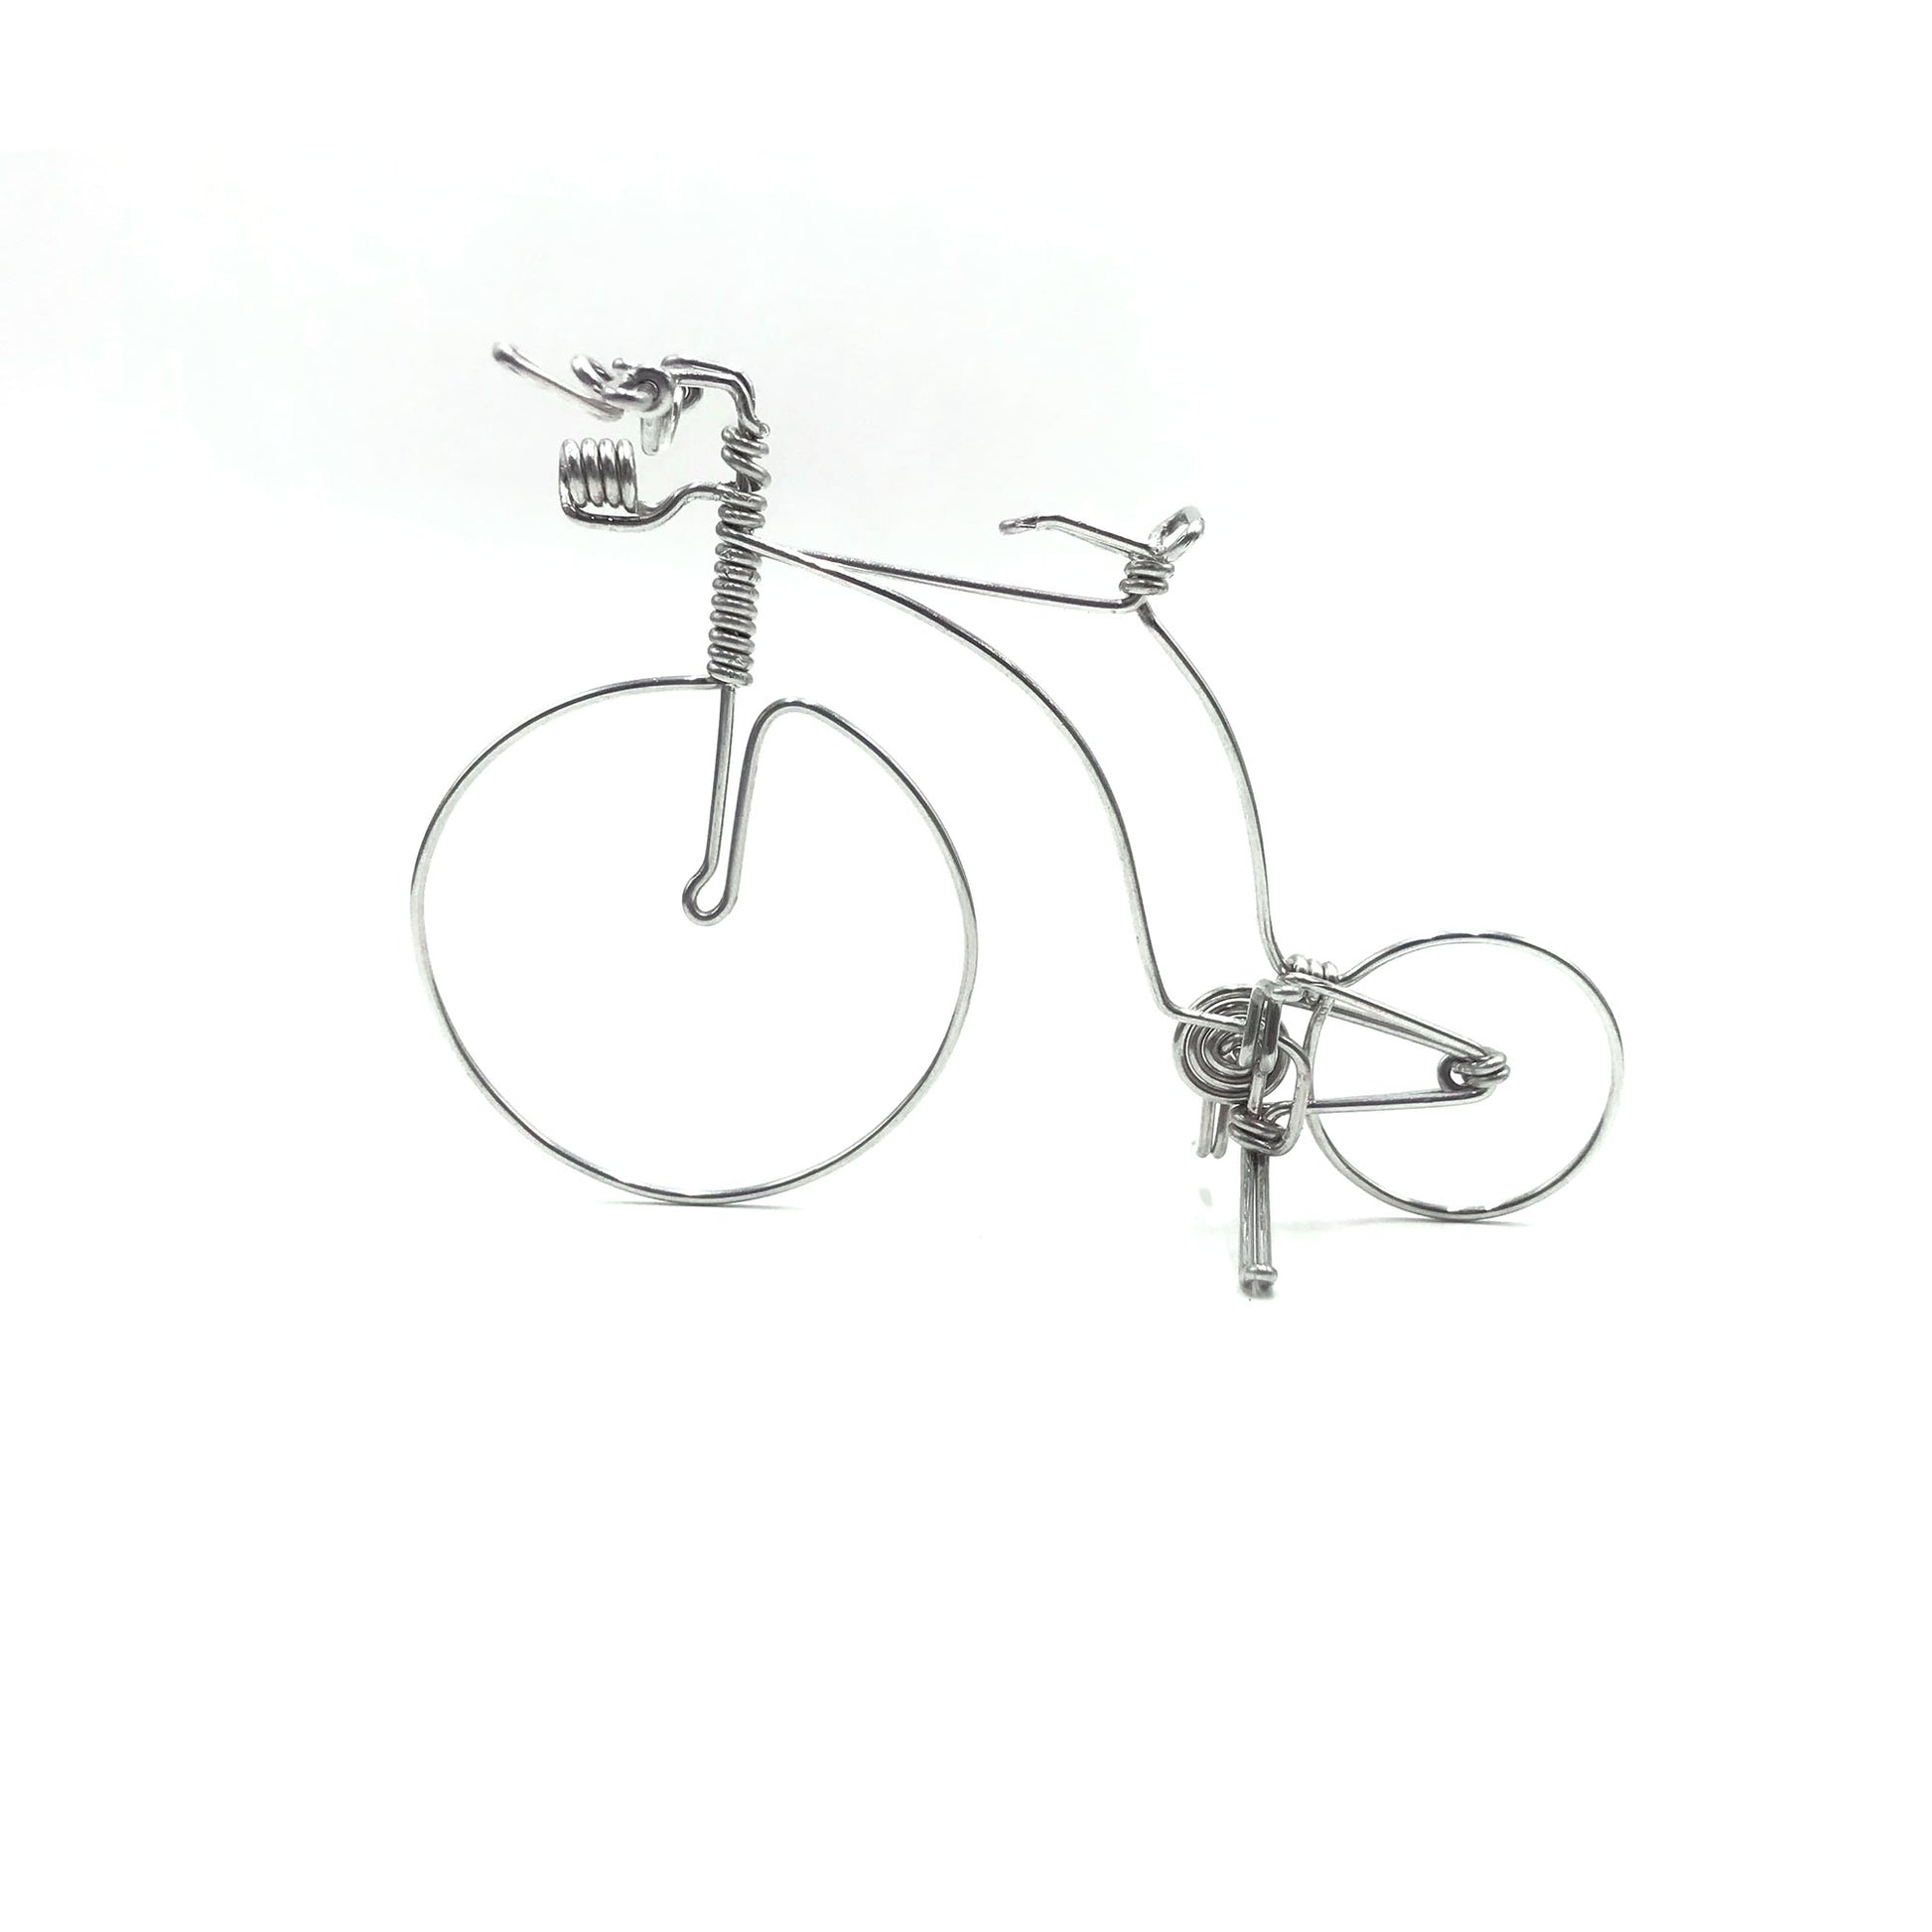 Miniature Wire Art Antique Bicycle Metal hand-crafted from aluminium wire